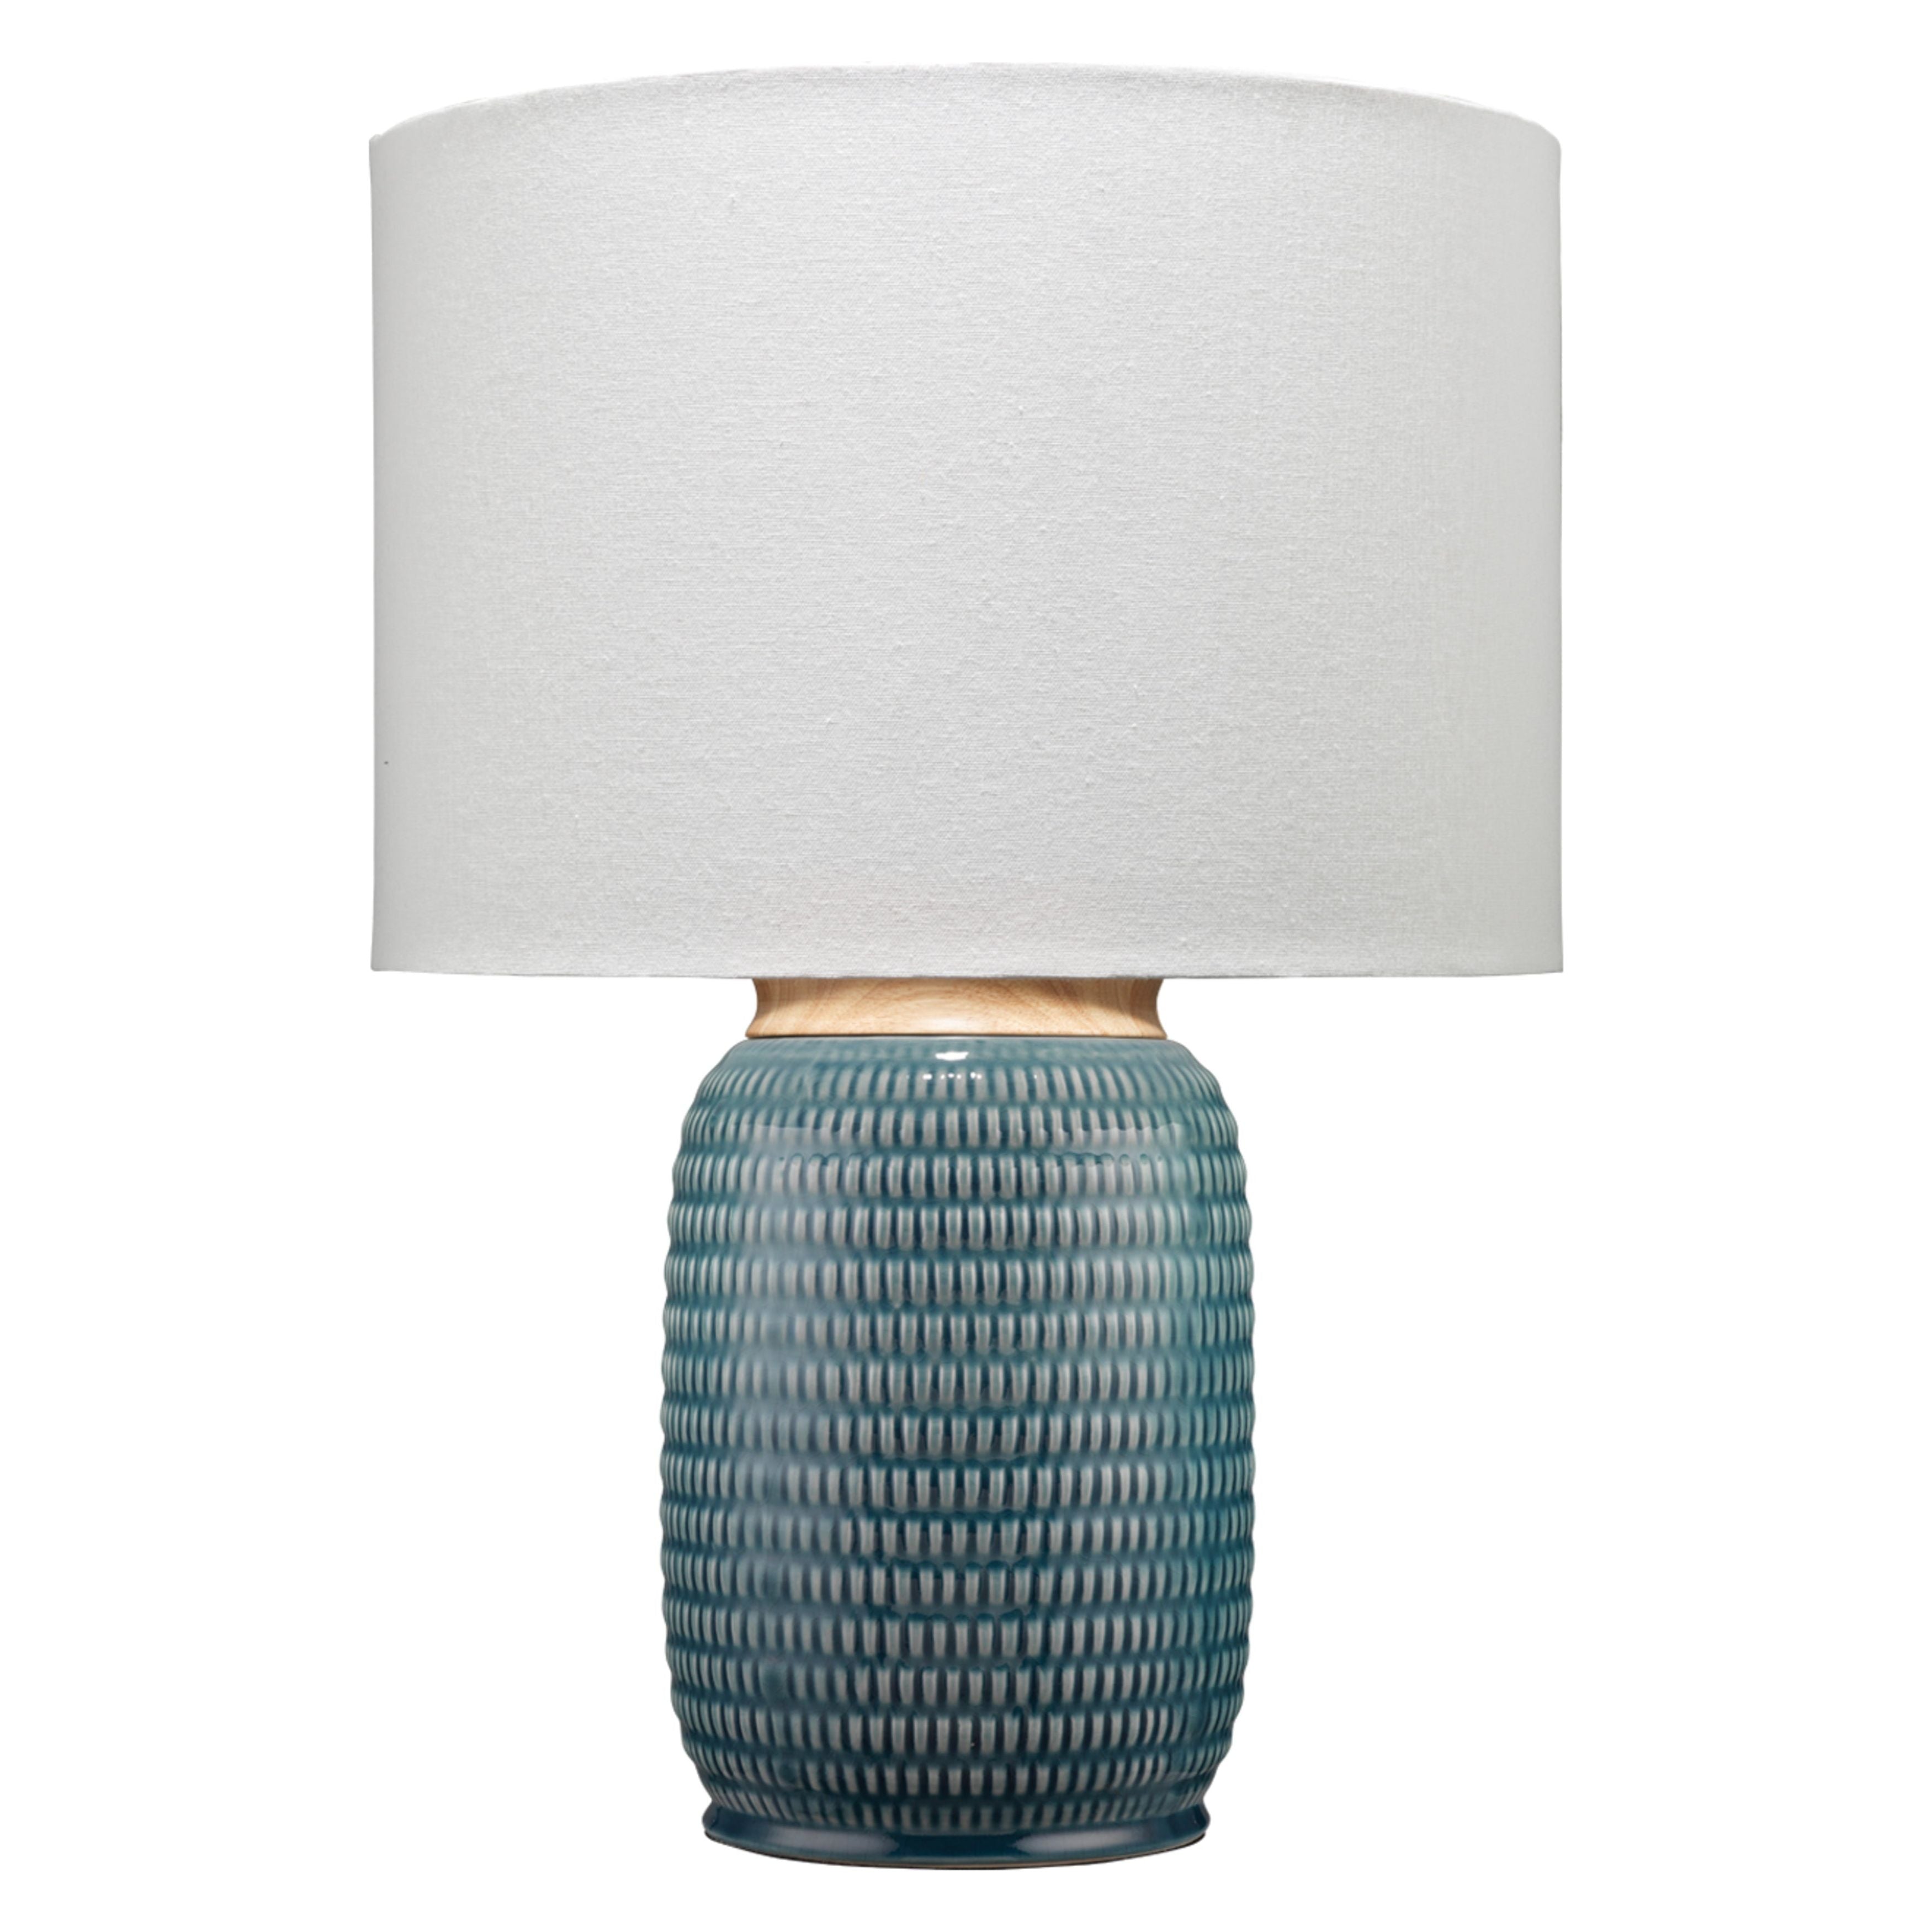 Jamie Young Company - BL217-TL11BL - Graham Table Lamp - Graham - Blue